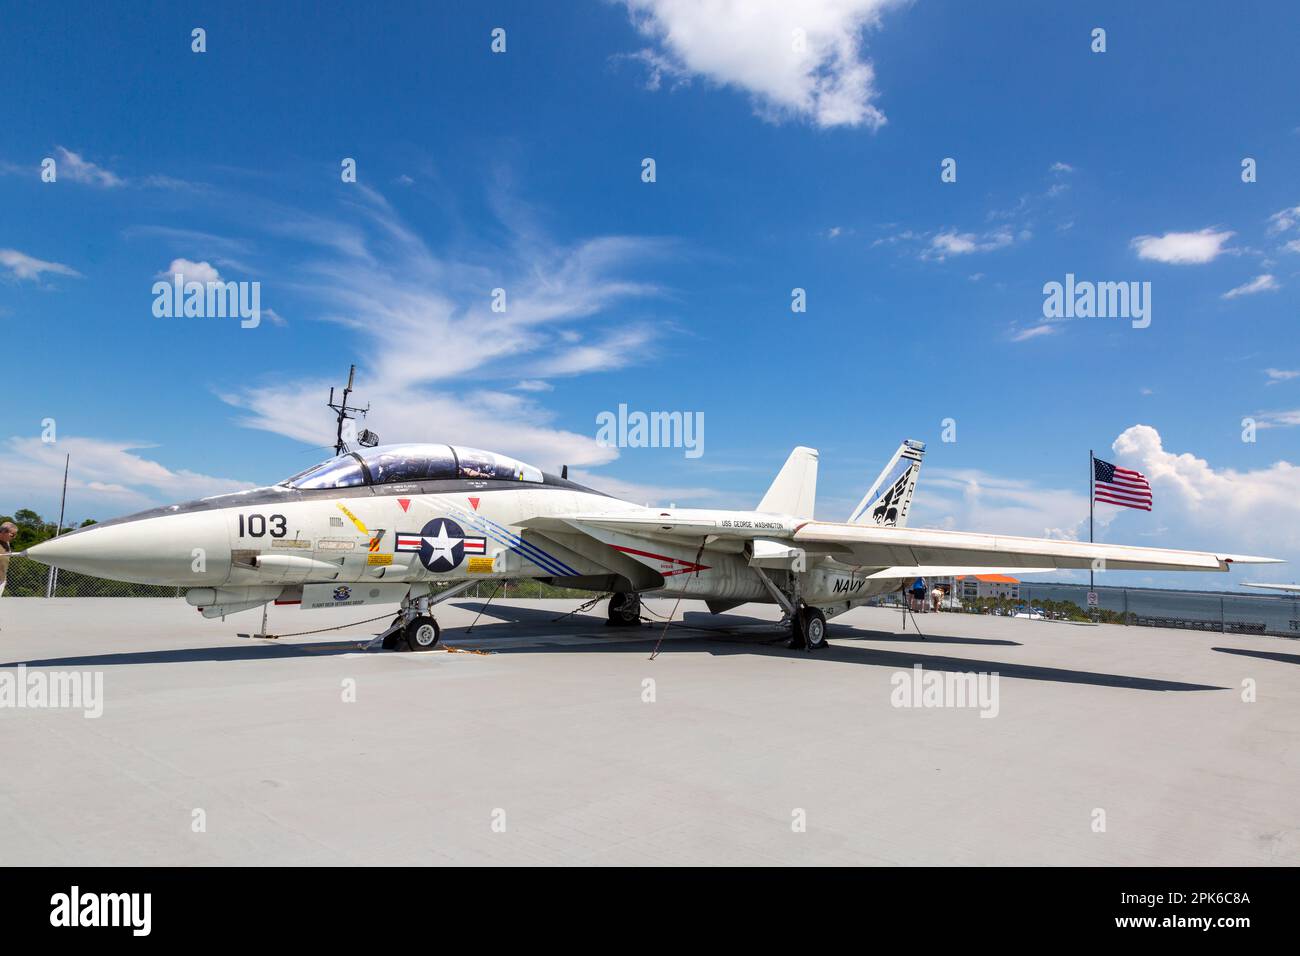 A United States Navy Grumman F-14 Tomcat fighter jet sits in static display at Patriot's Point Museum in Mount Pleasant, South Carolina, US. Stock Photo